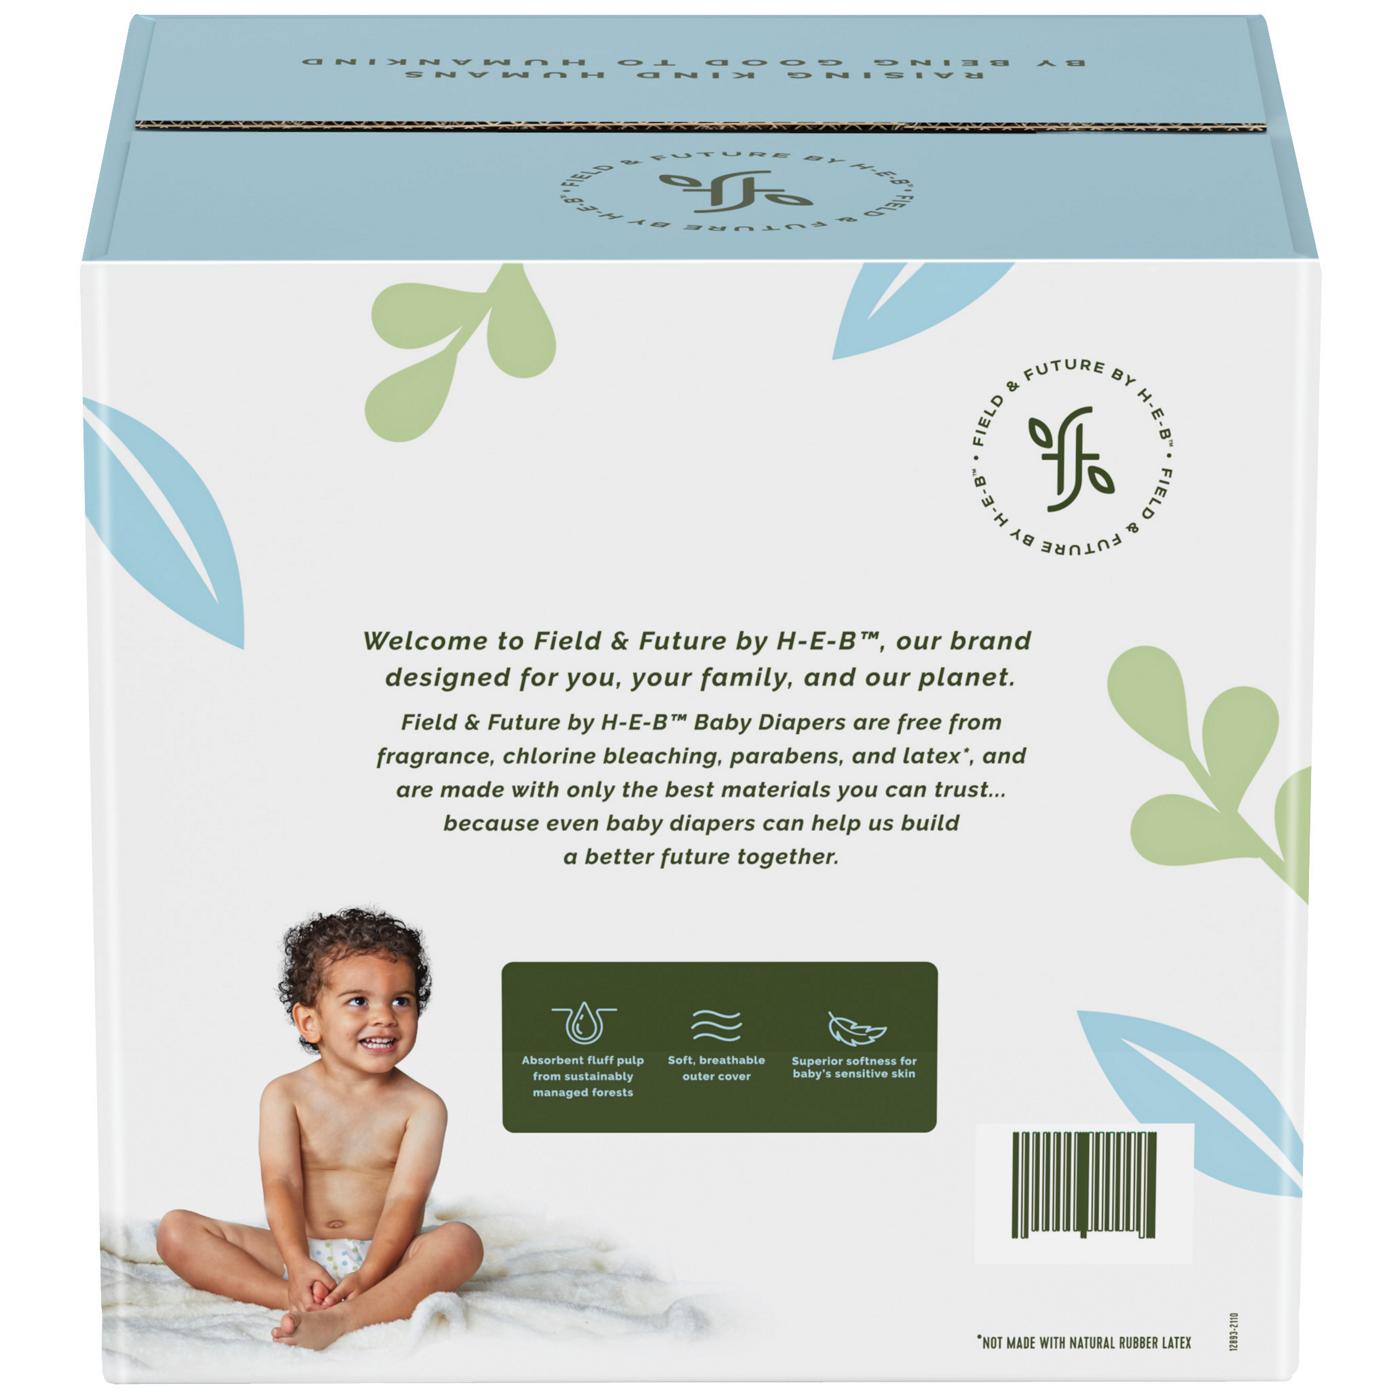 Field & Future by H-E-B Plus Pack Baby Diapers  - Size 7; image 4 of 6